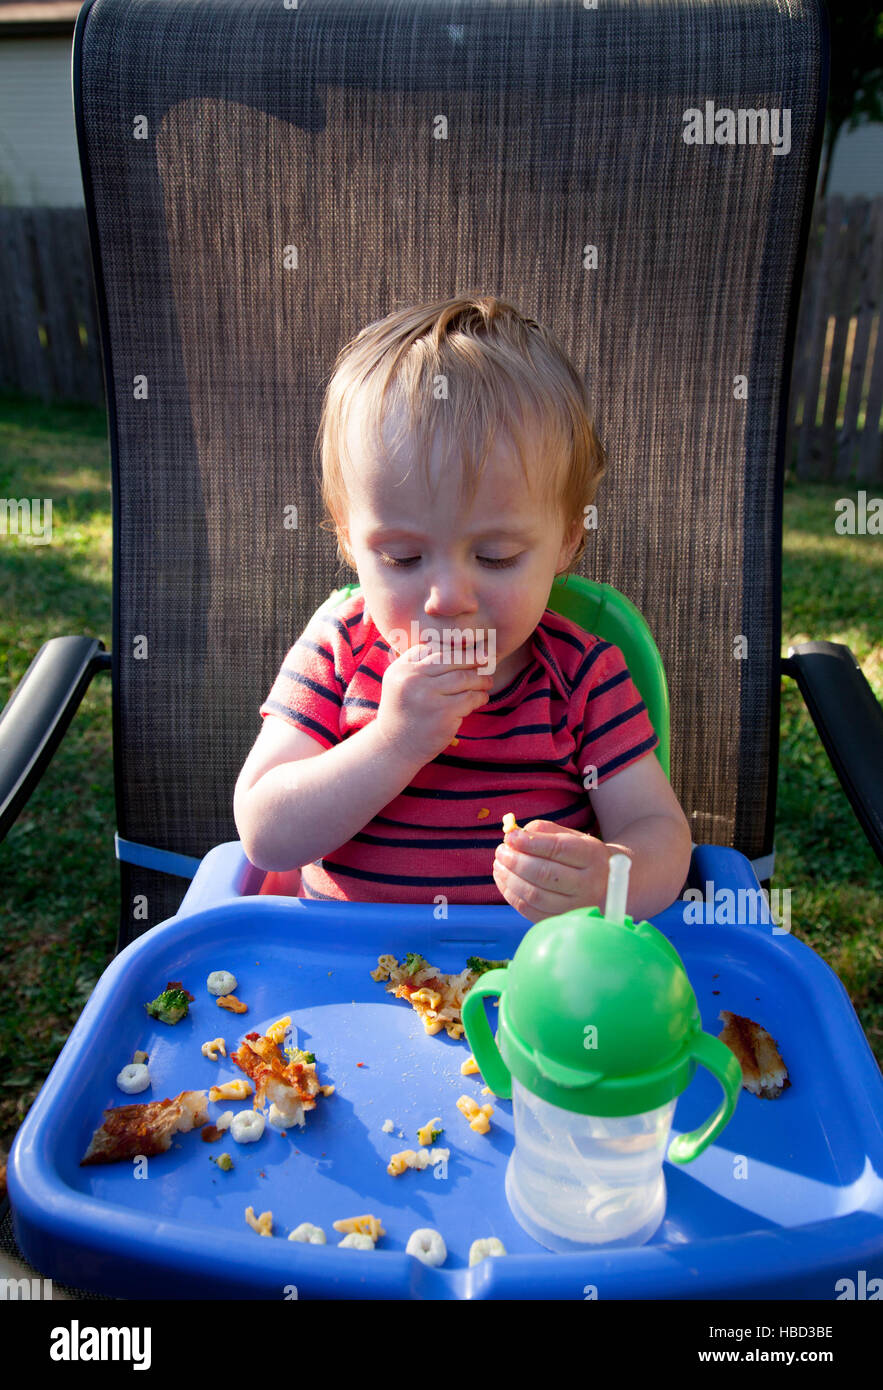 Caucasian baby boy sits in high chair and eats food at a picnic Stock Photo